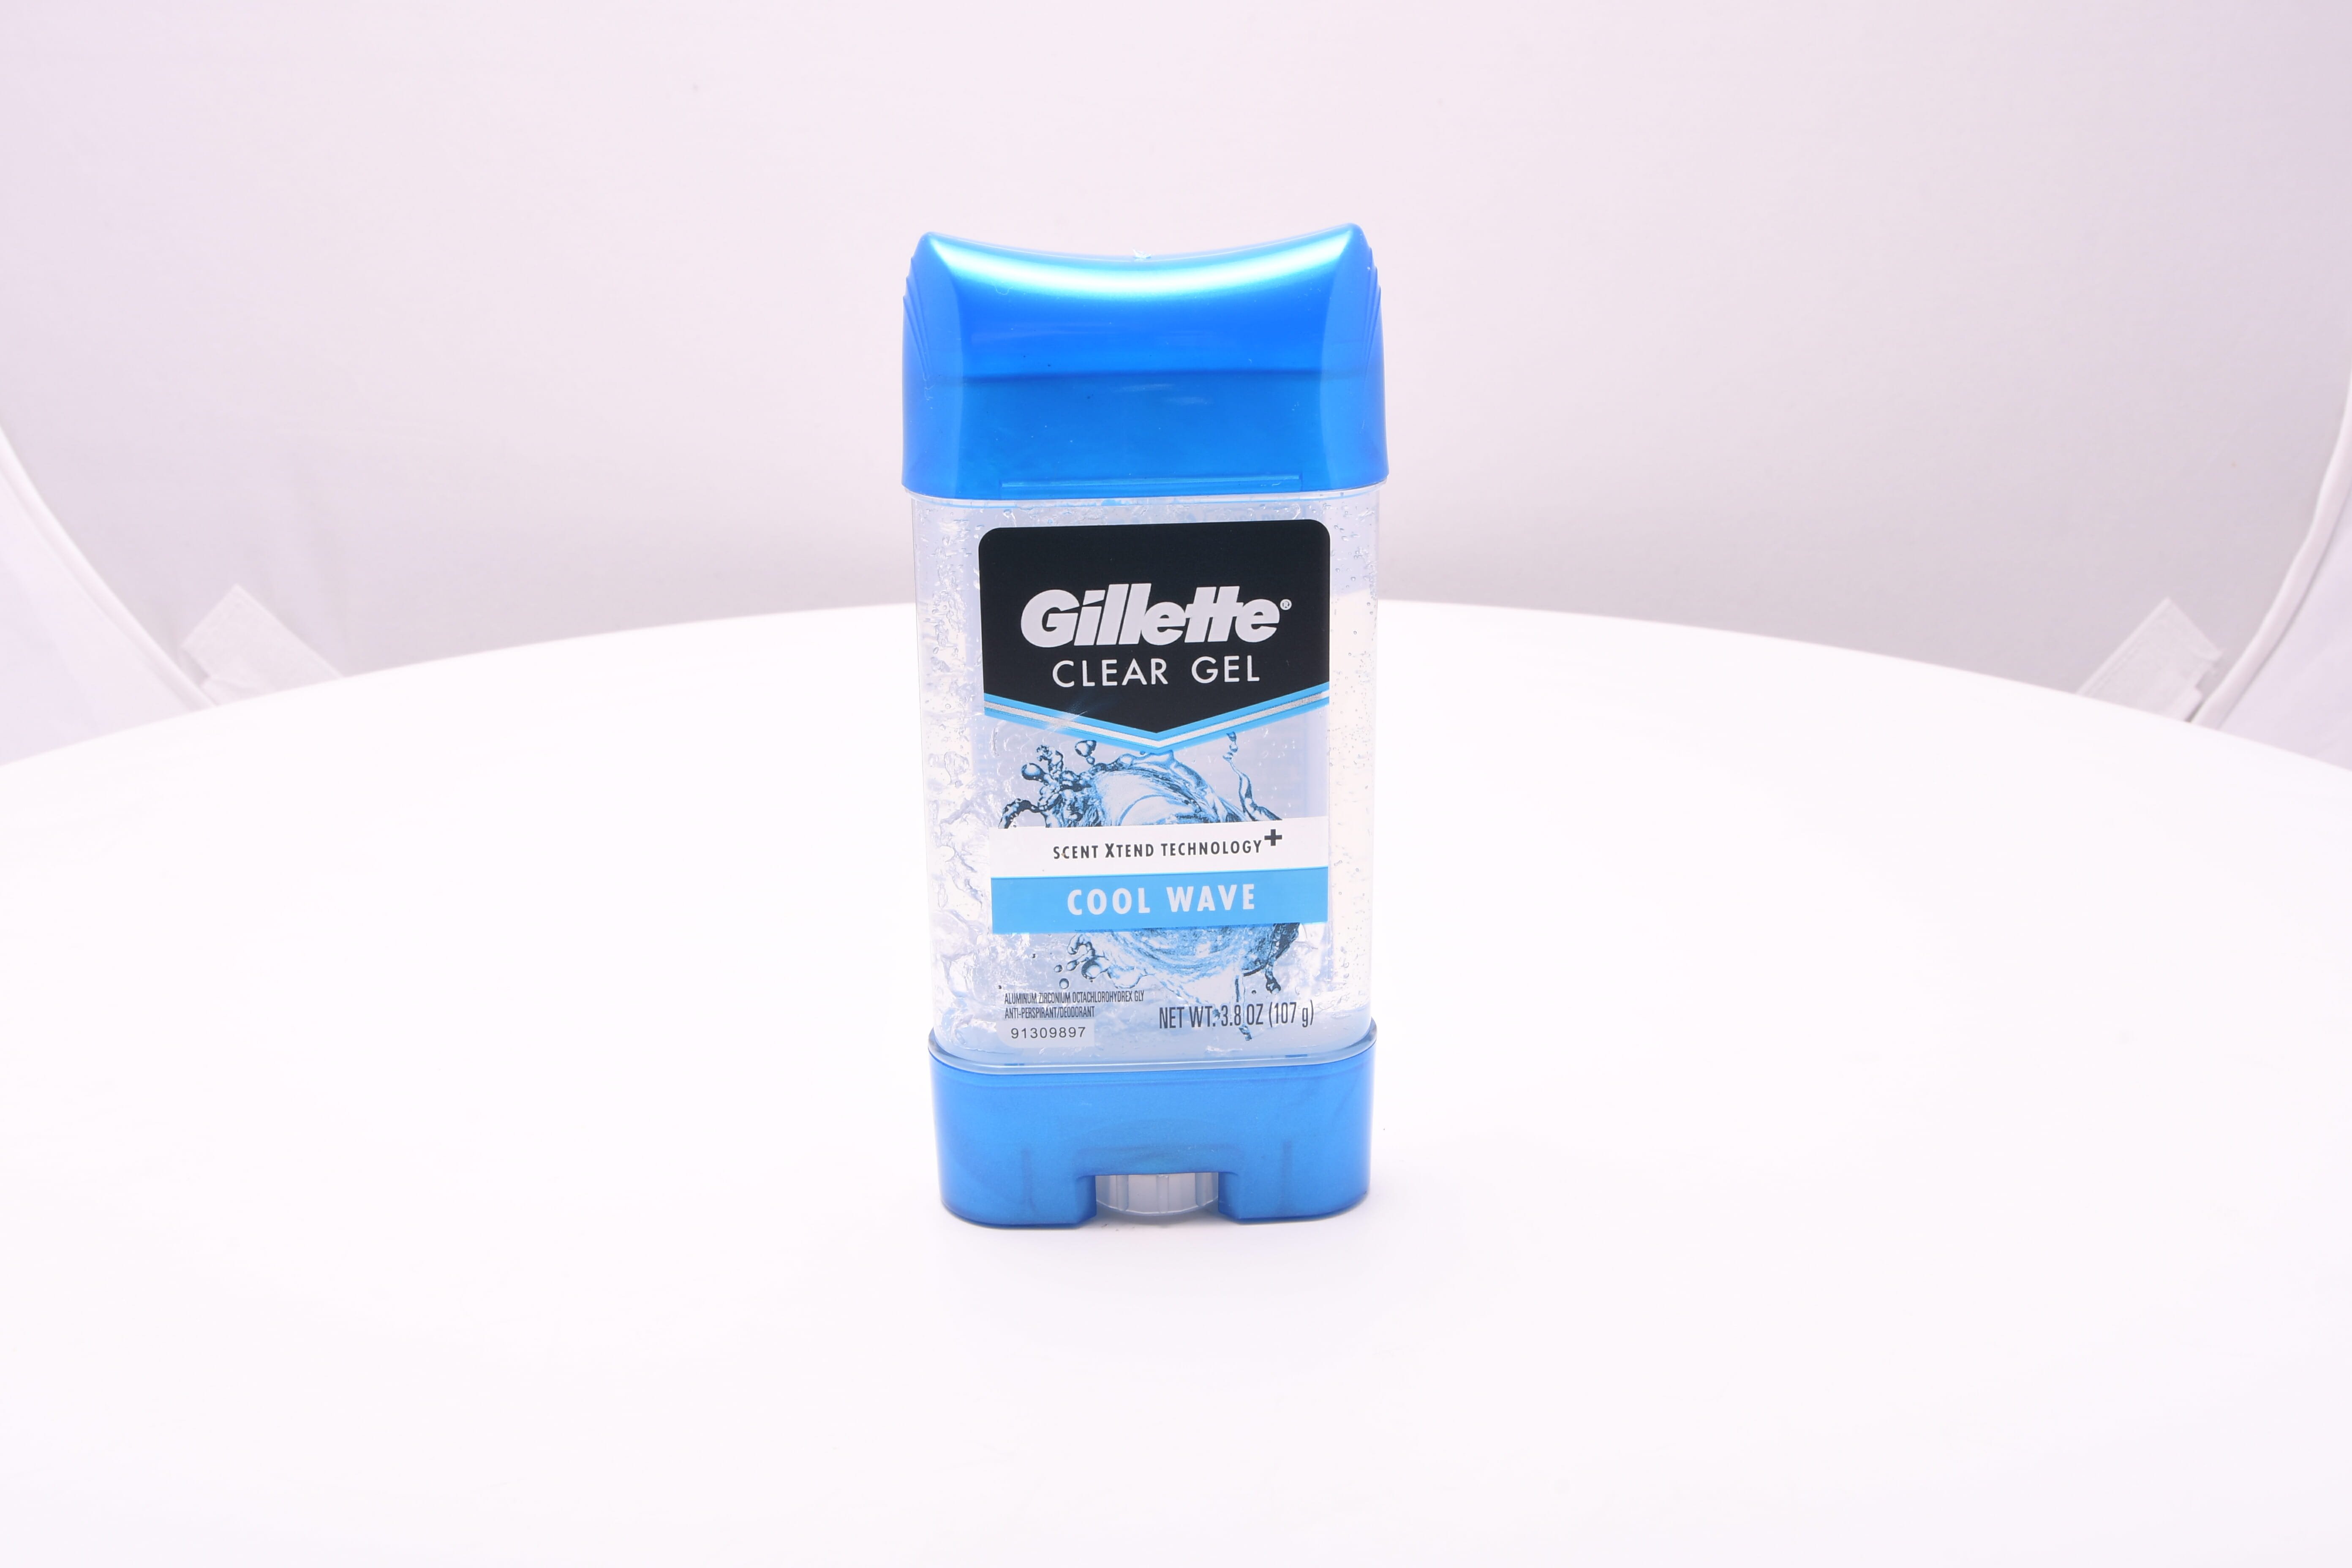 A gel-style combination deodorant/antiperspirant, from Gillette.